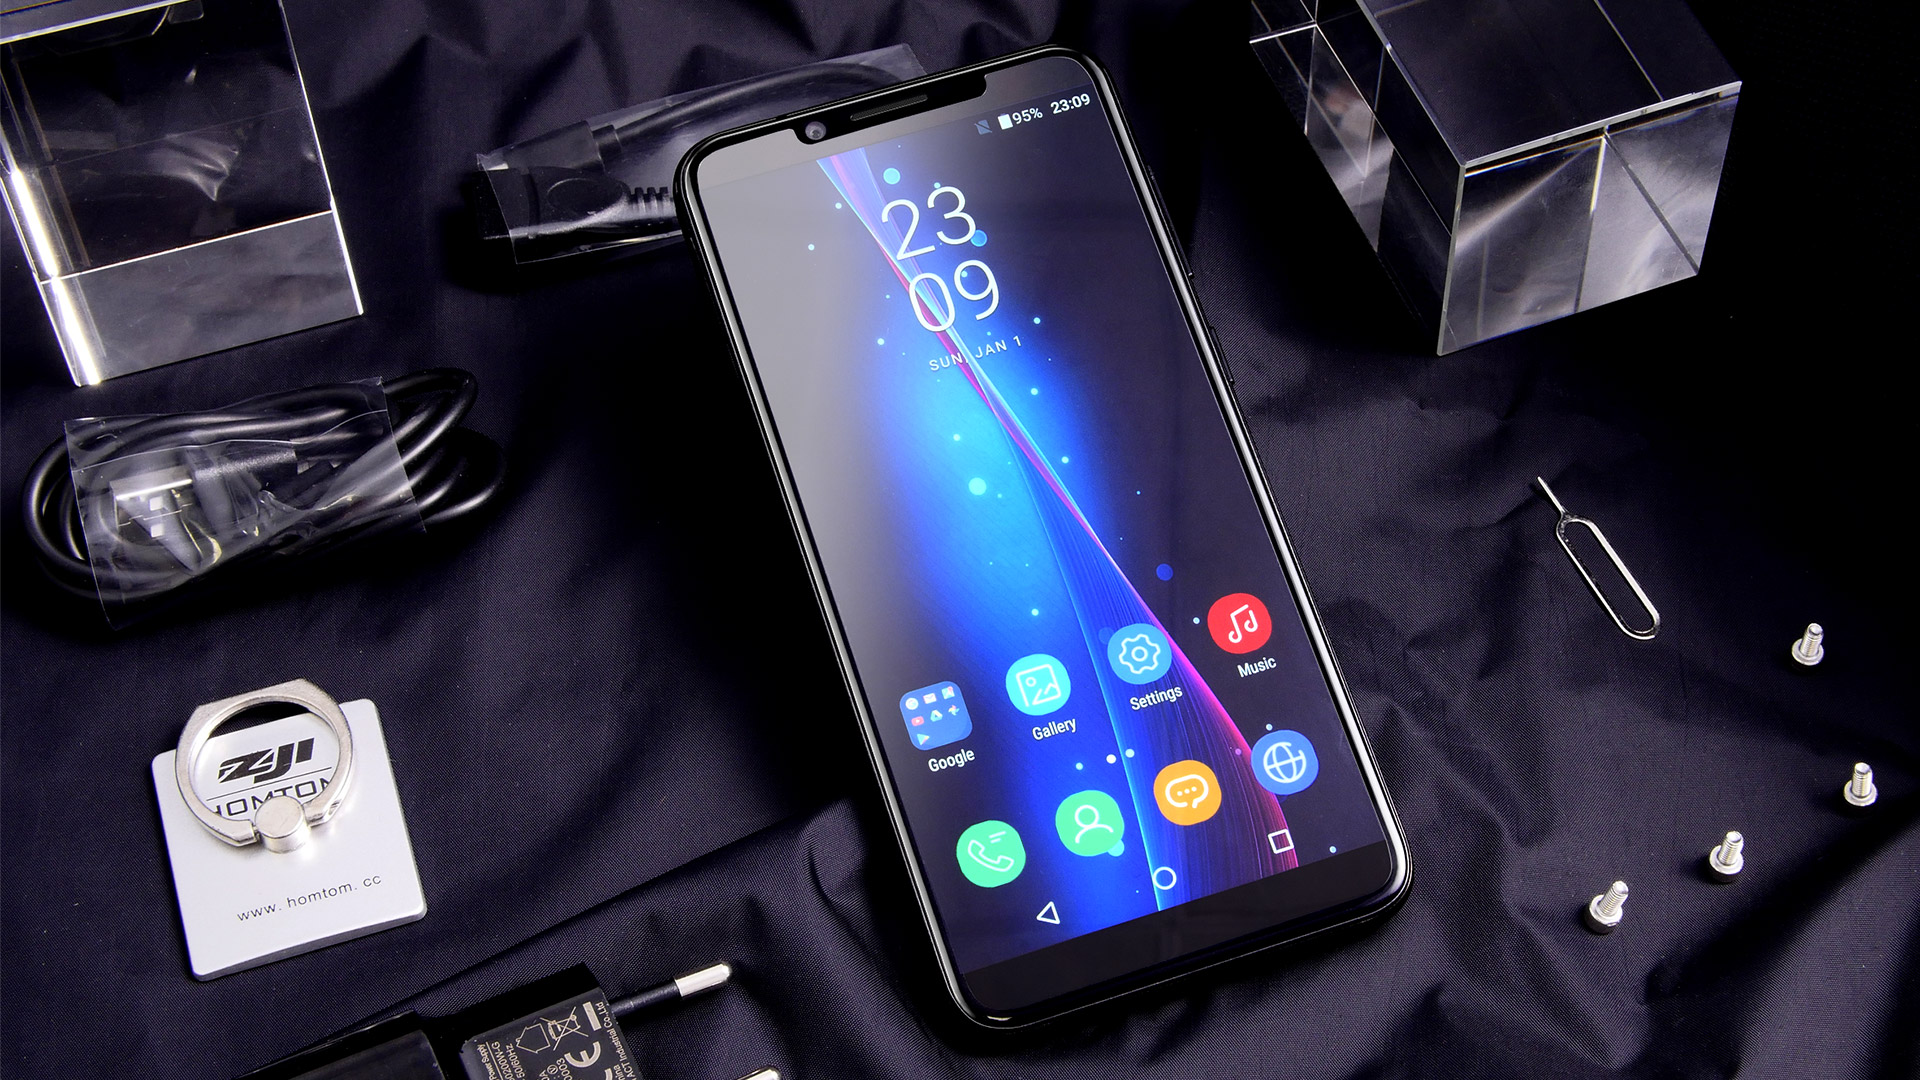 HOMTOM S8 is close to the start of sales